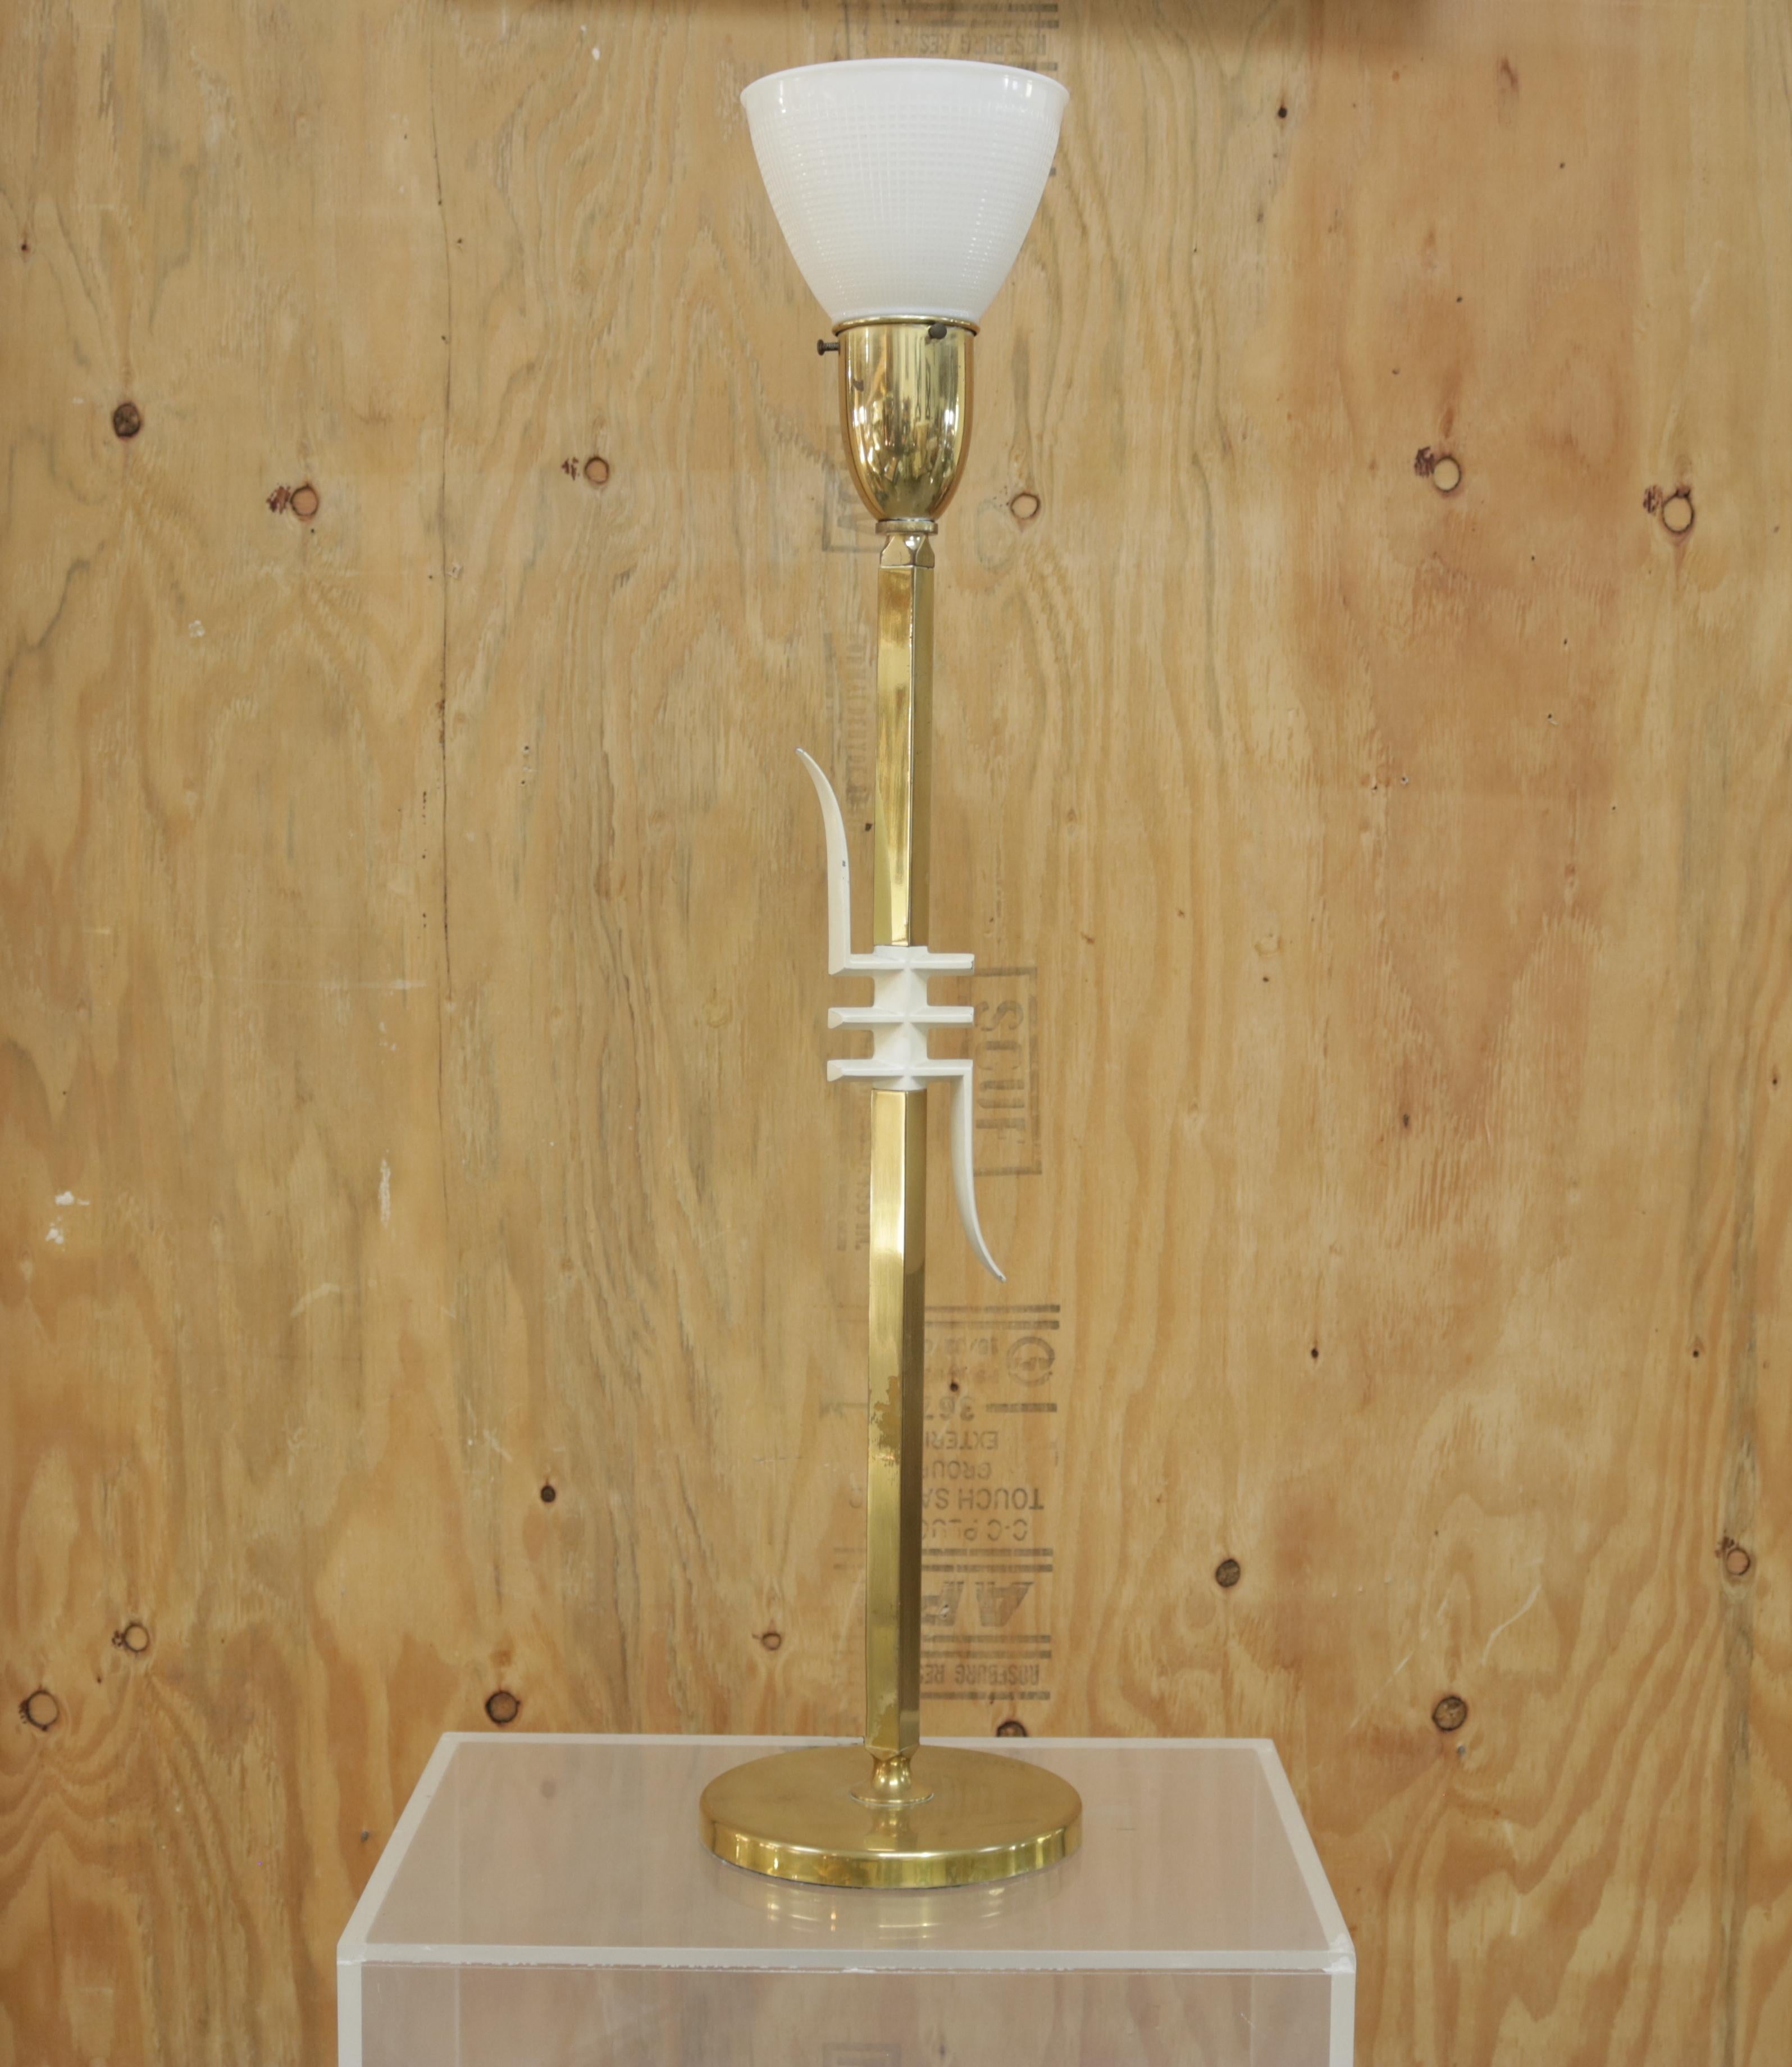 The elegant brass table lamp has a white lacquered wood graphic design with a frosted glass shade covered by a custom order white plastic shade.
The shade is 13.88